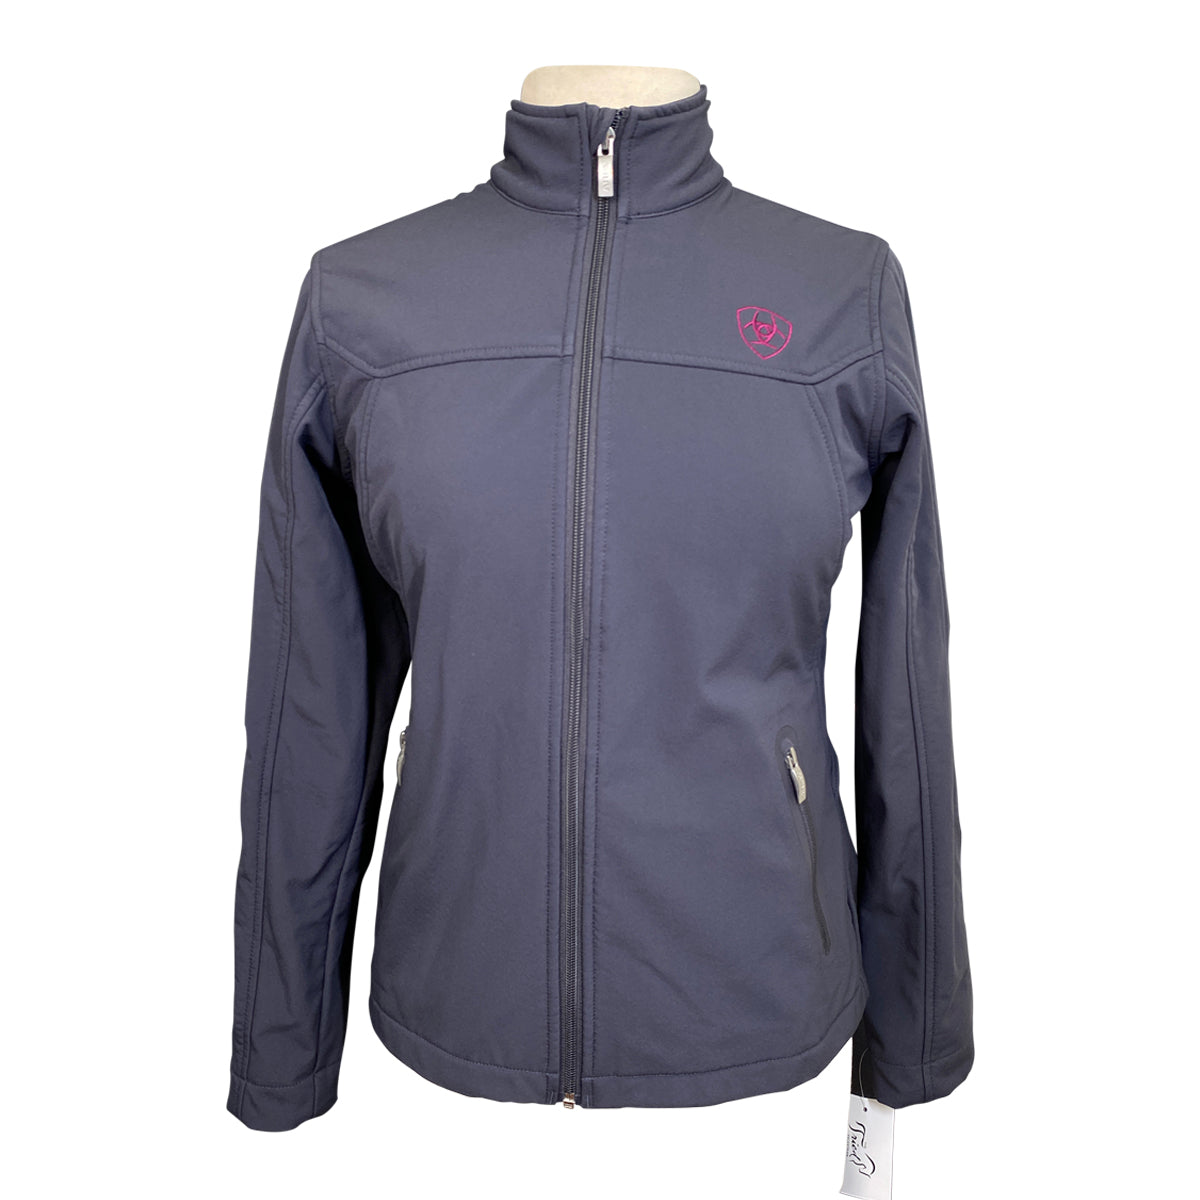 Ariat 'New Team' Softshell Jacket in Periscope